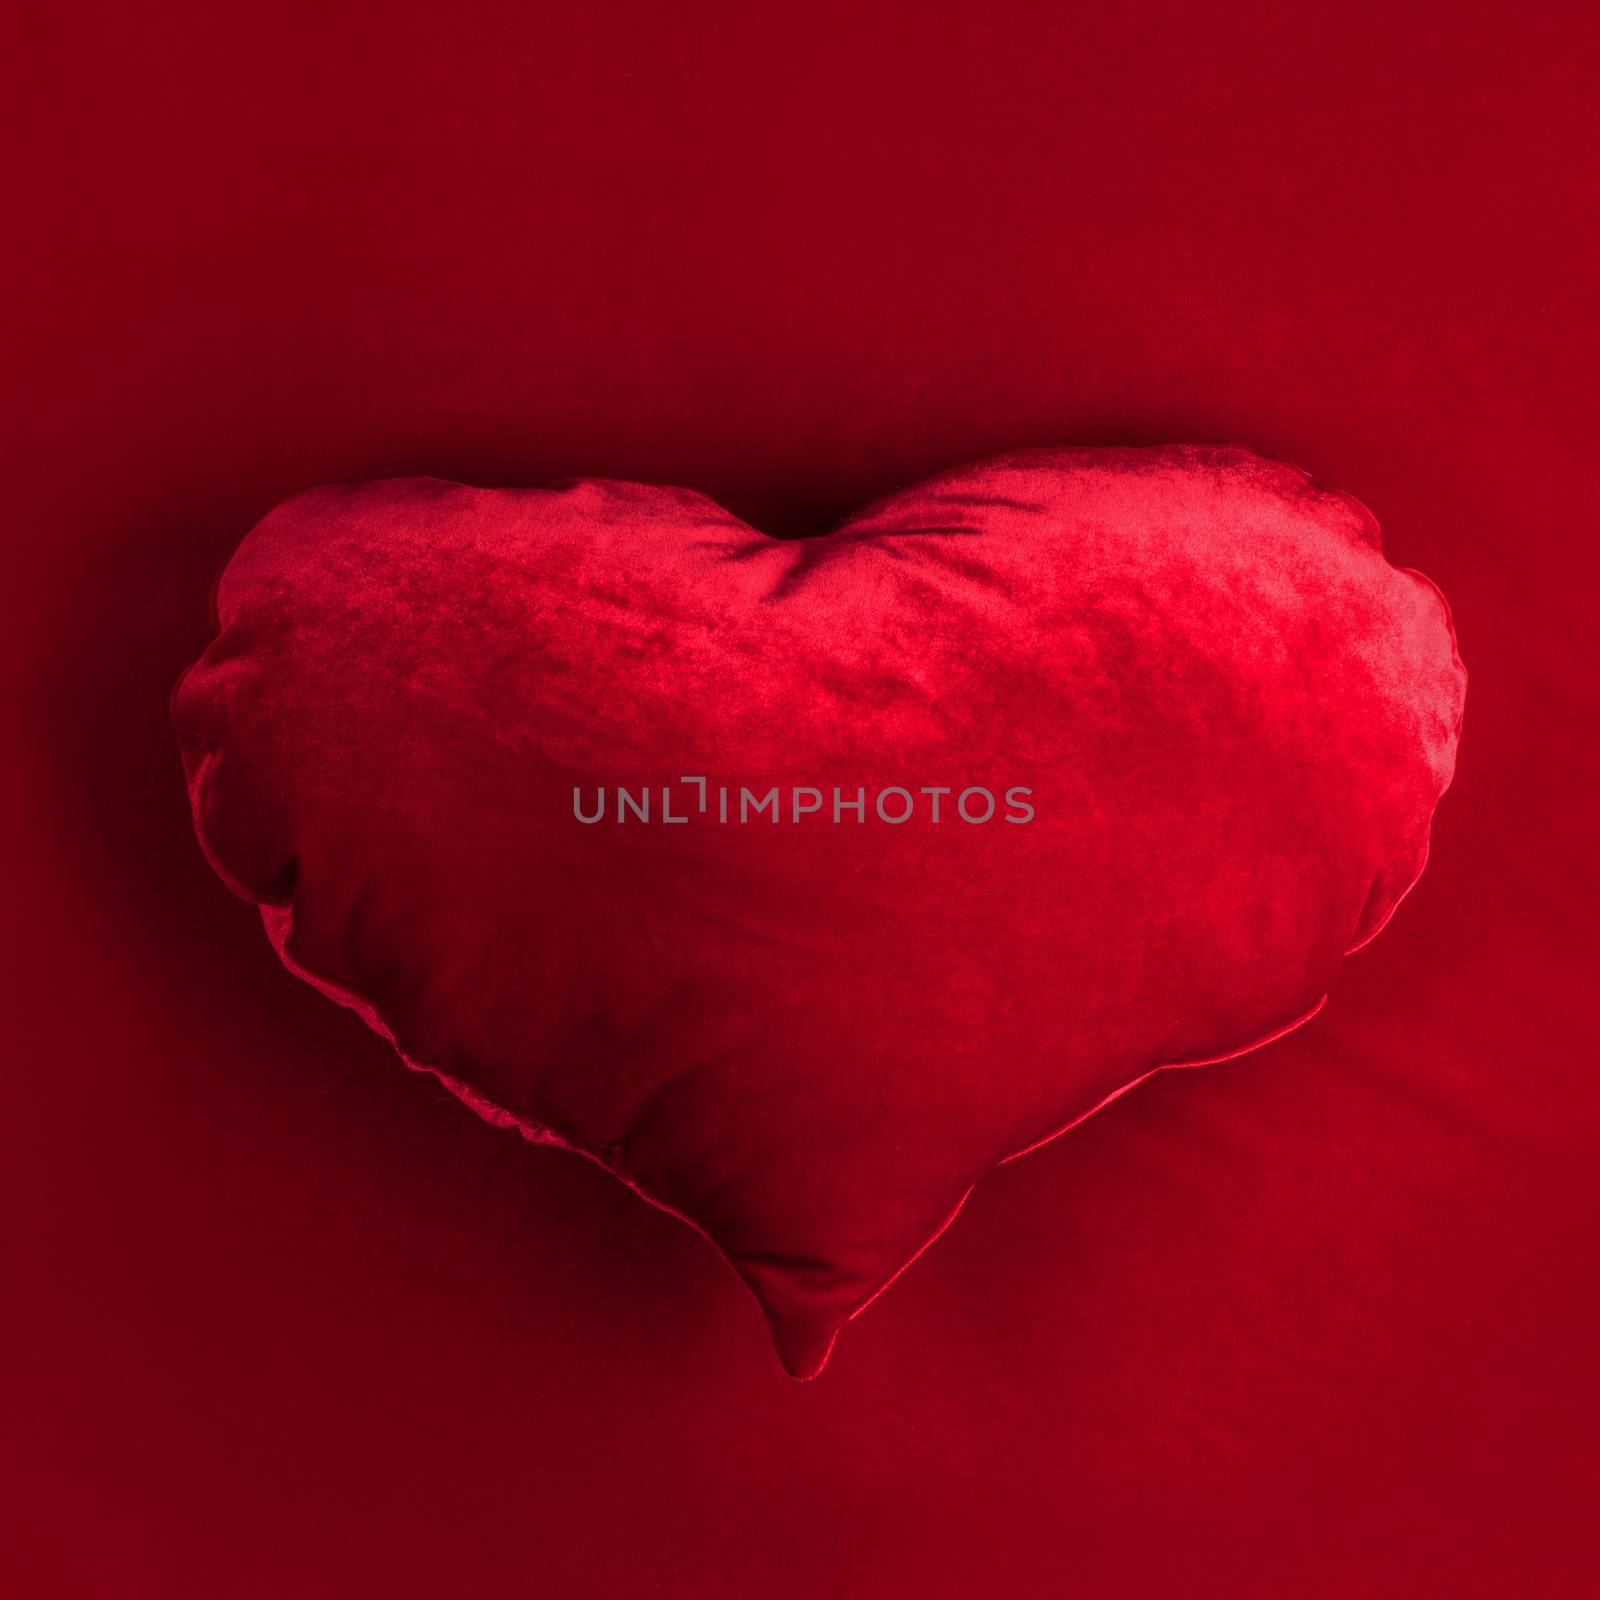 Red pillow heart on red fabric background, Valentines day